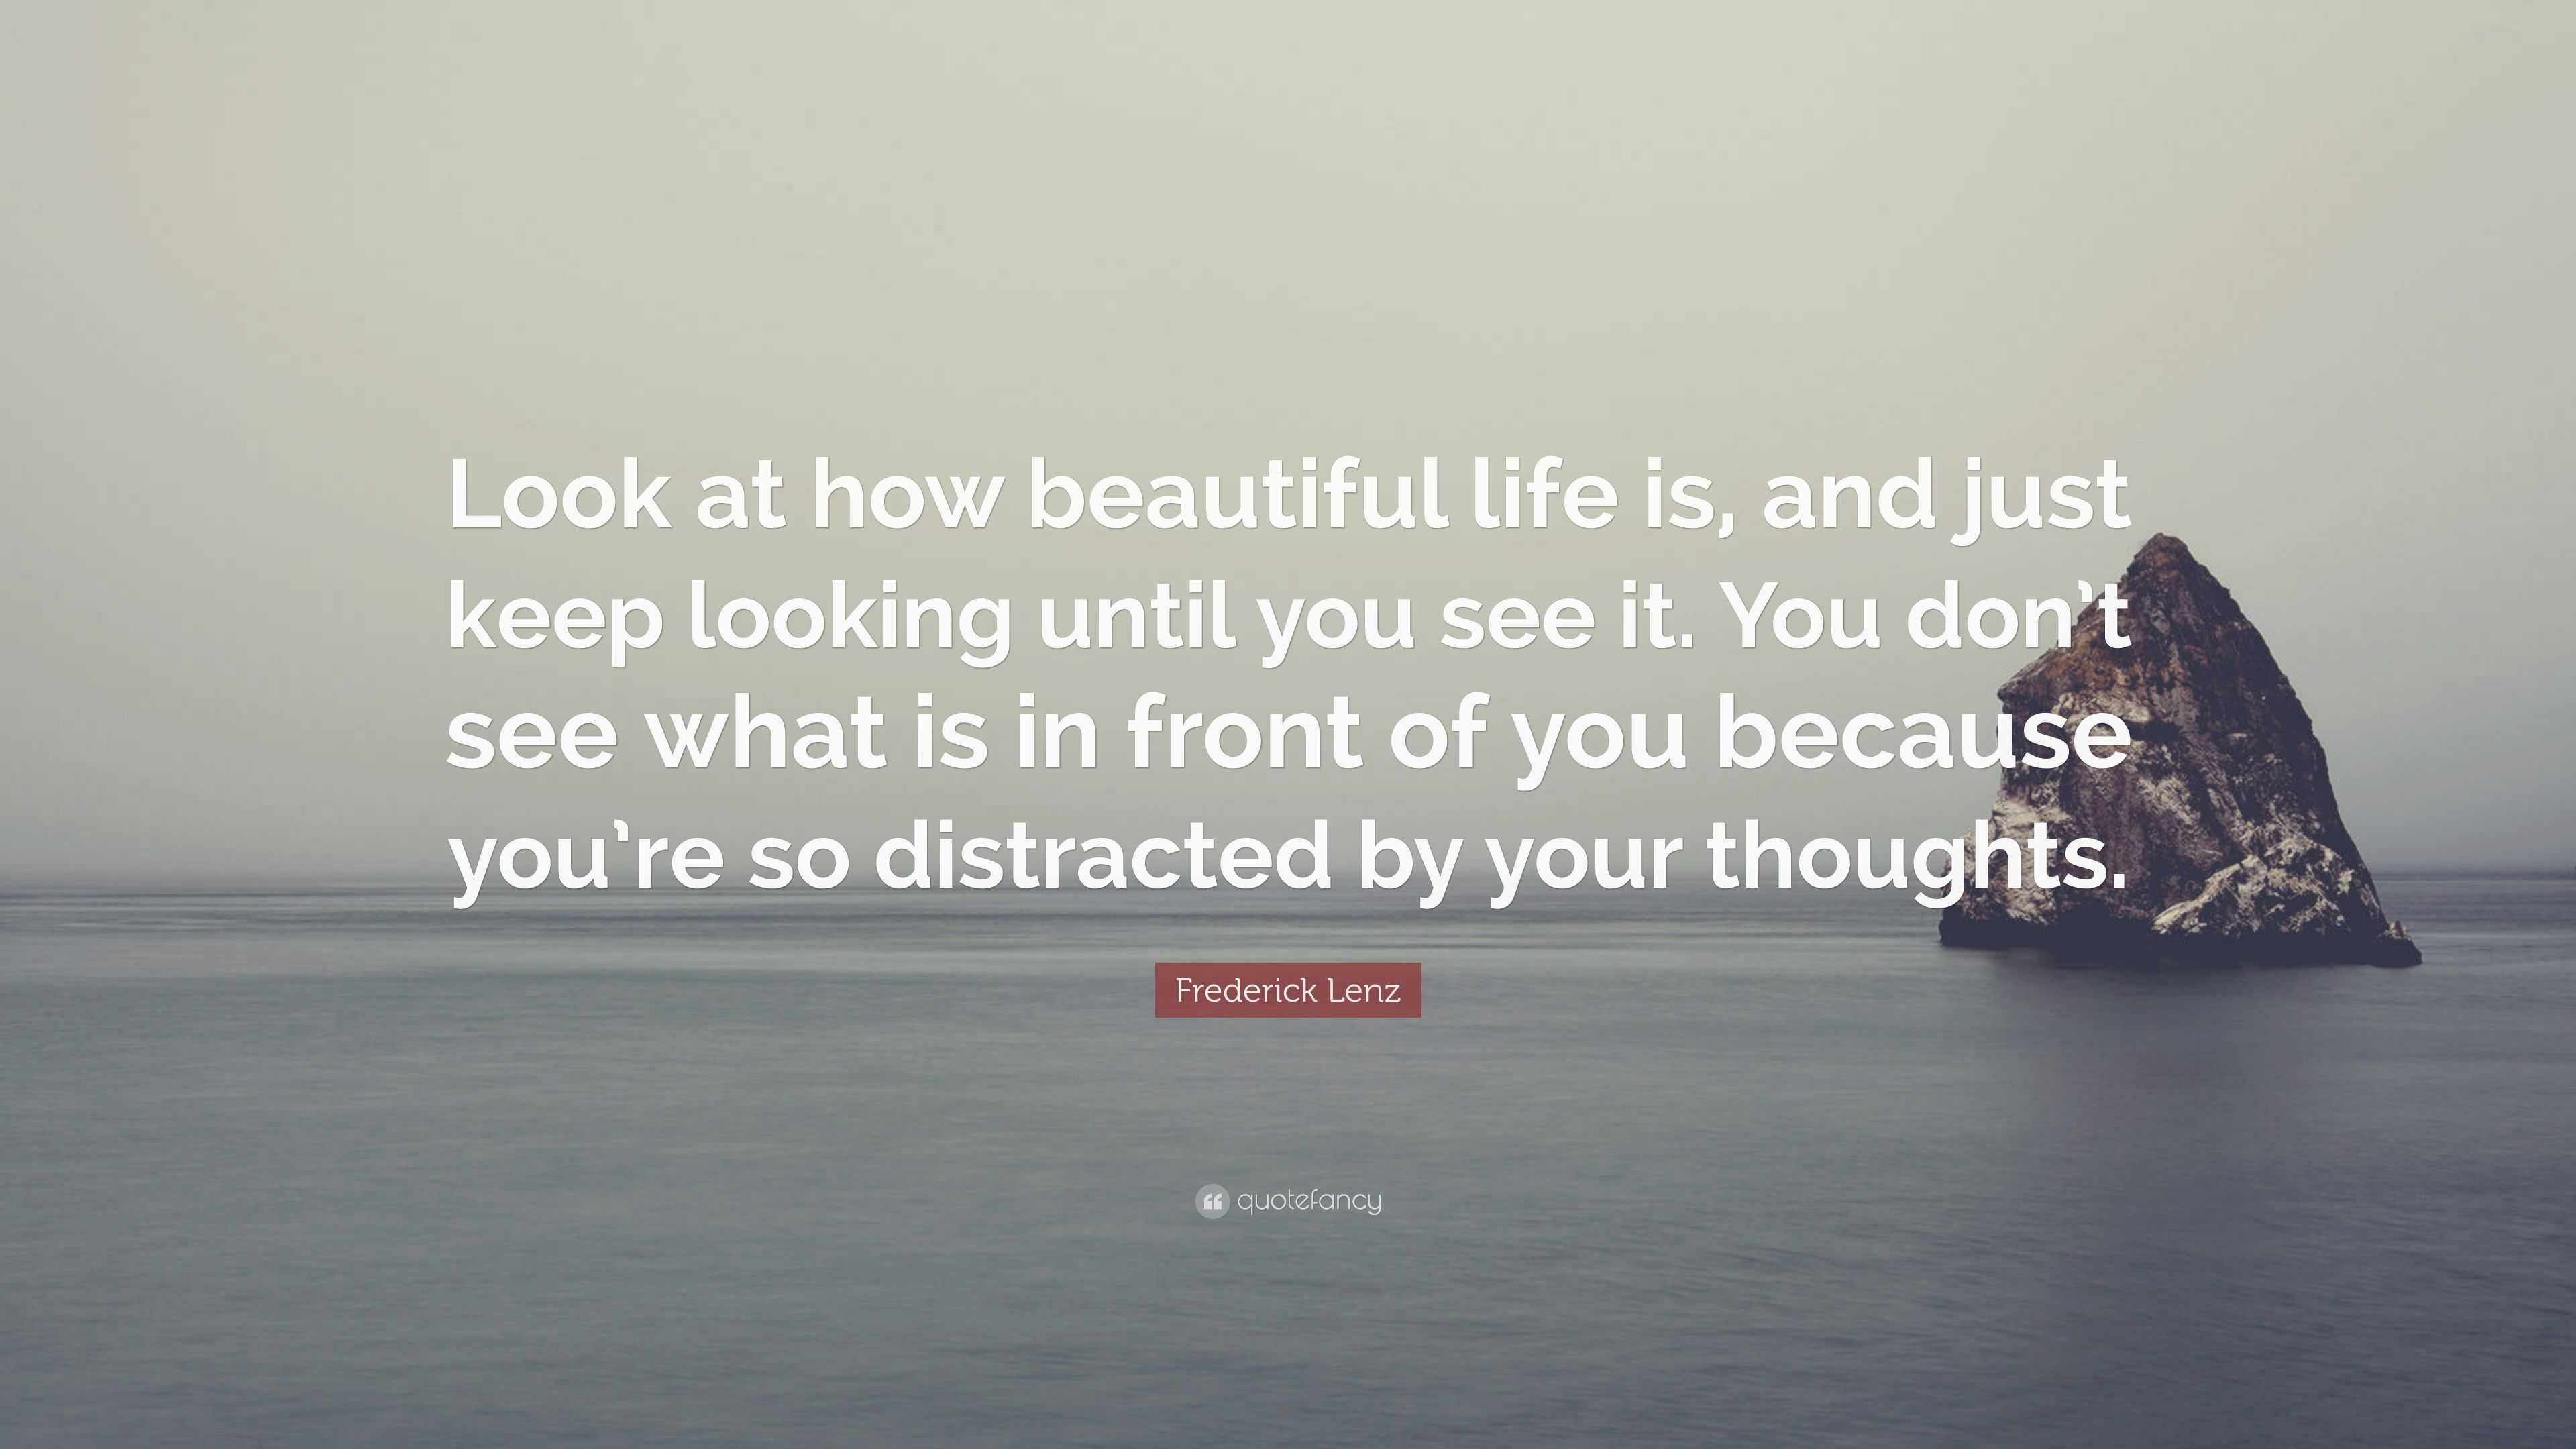 Frederick Lenz Quote: “Look at how beautiful life is, and just keep ...